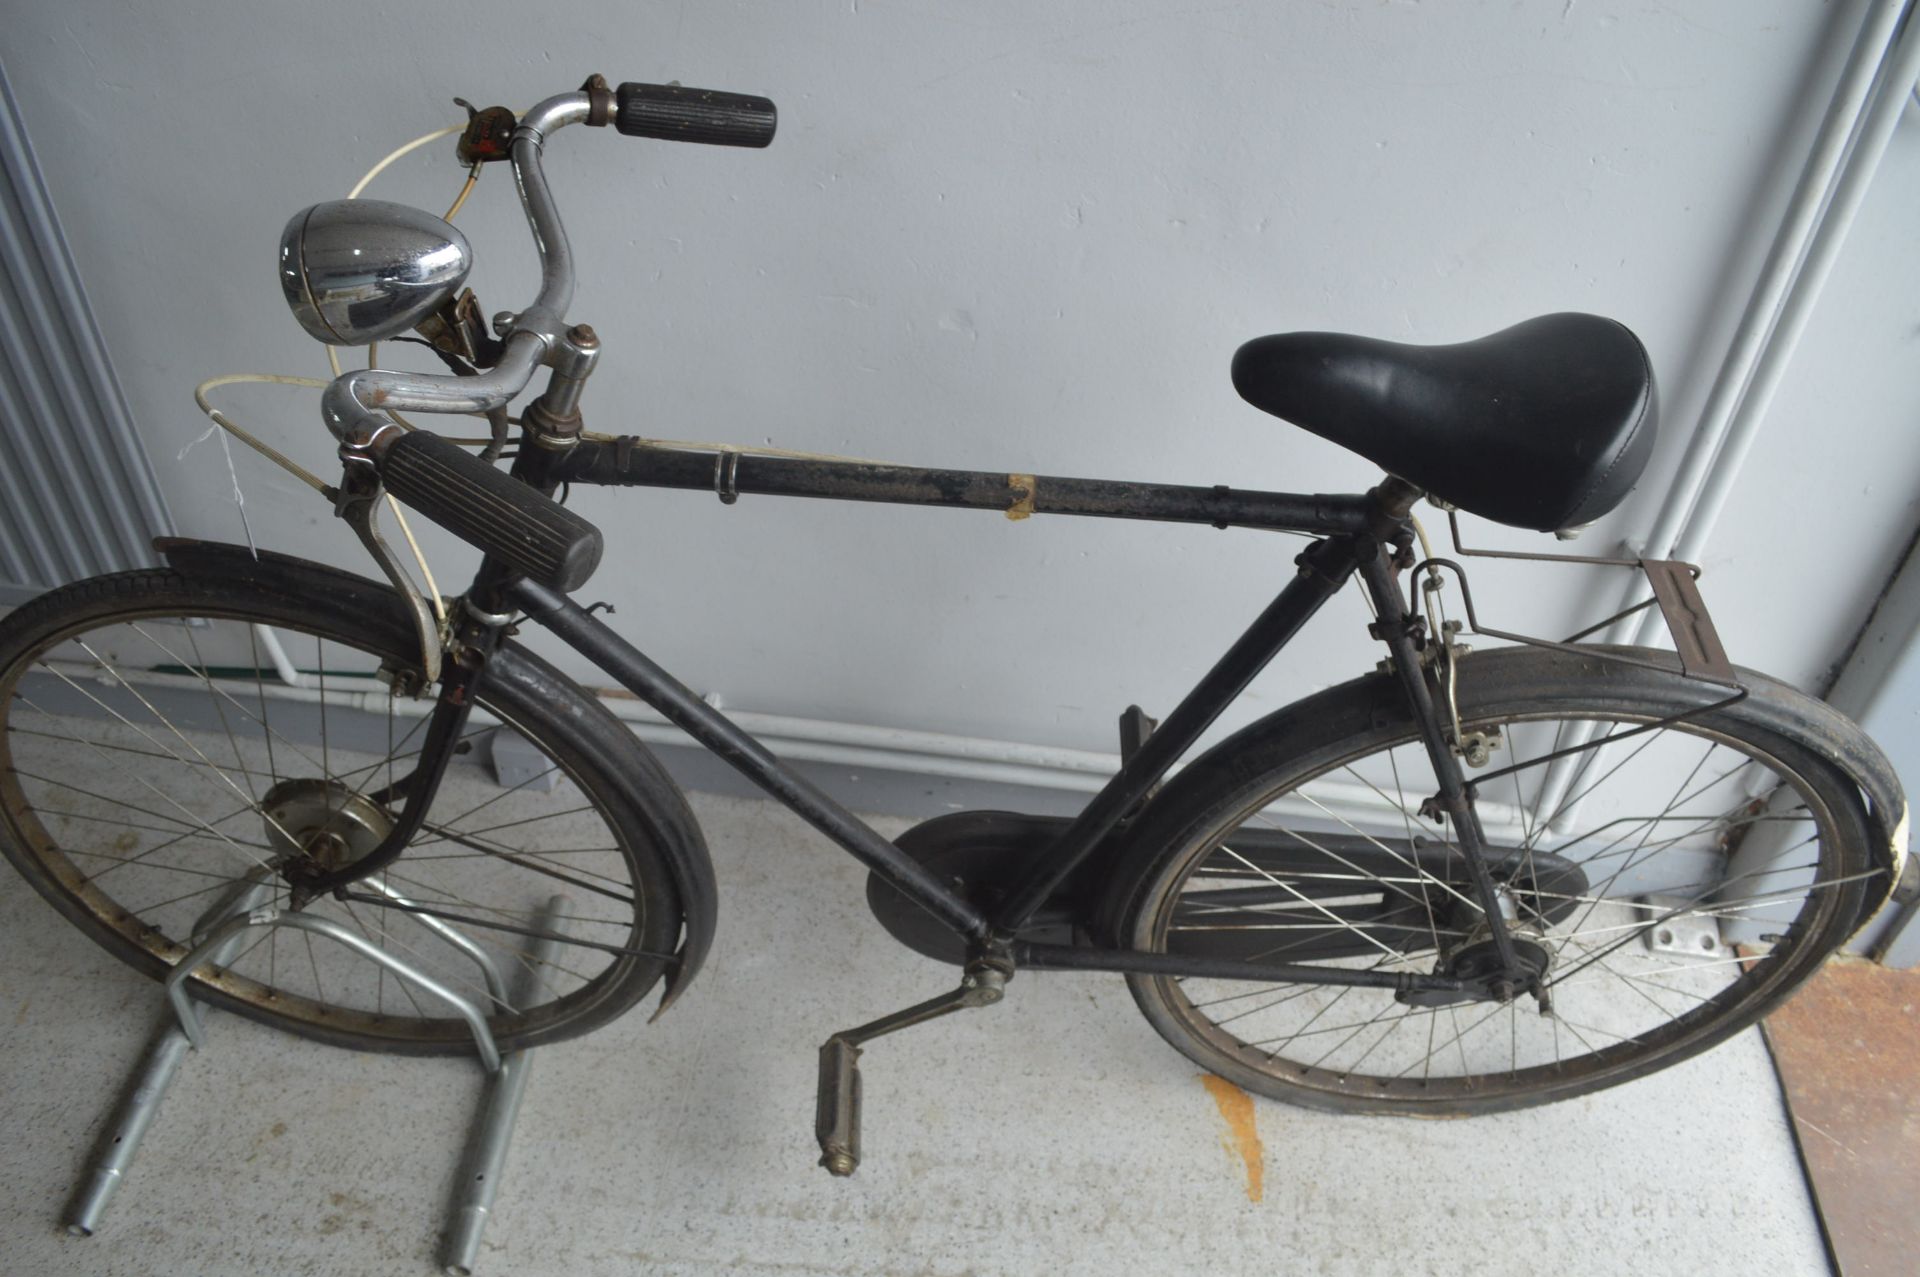 Vintage Raleigh Police Bicycle with 3 Speed Sturmey Archer Gears Duel Rear Brakes, once belonged - Image 3 of 3